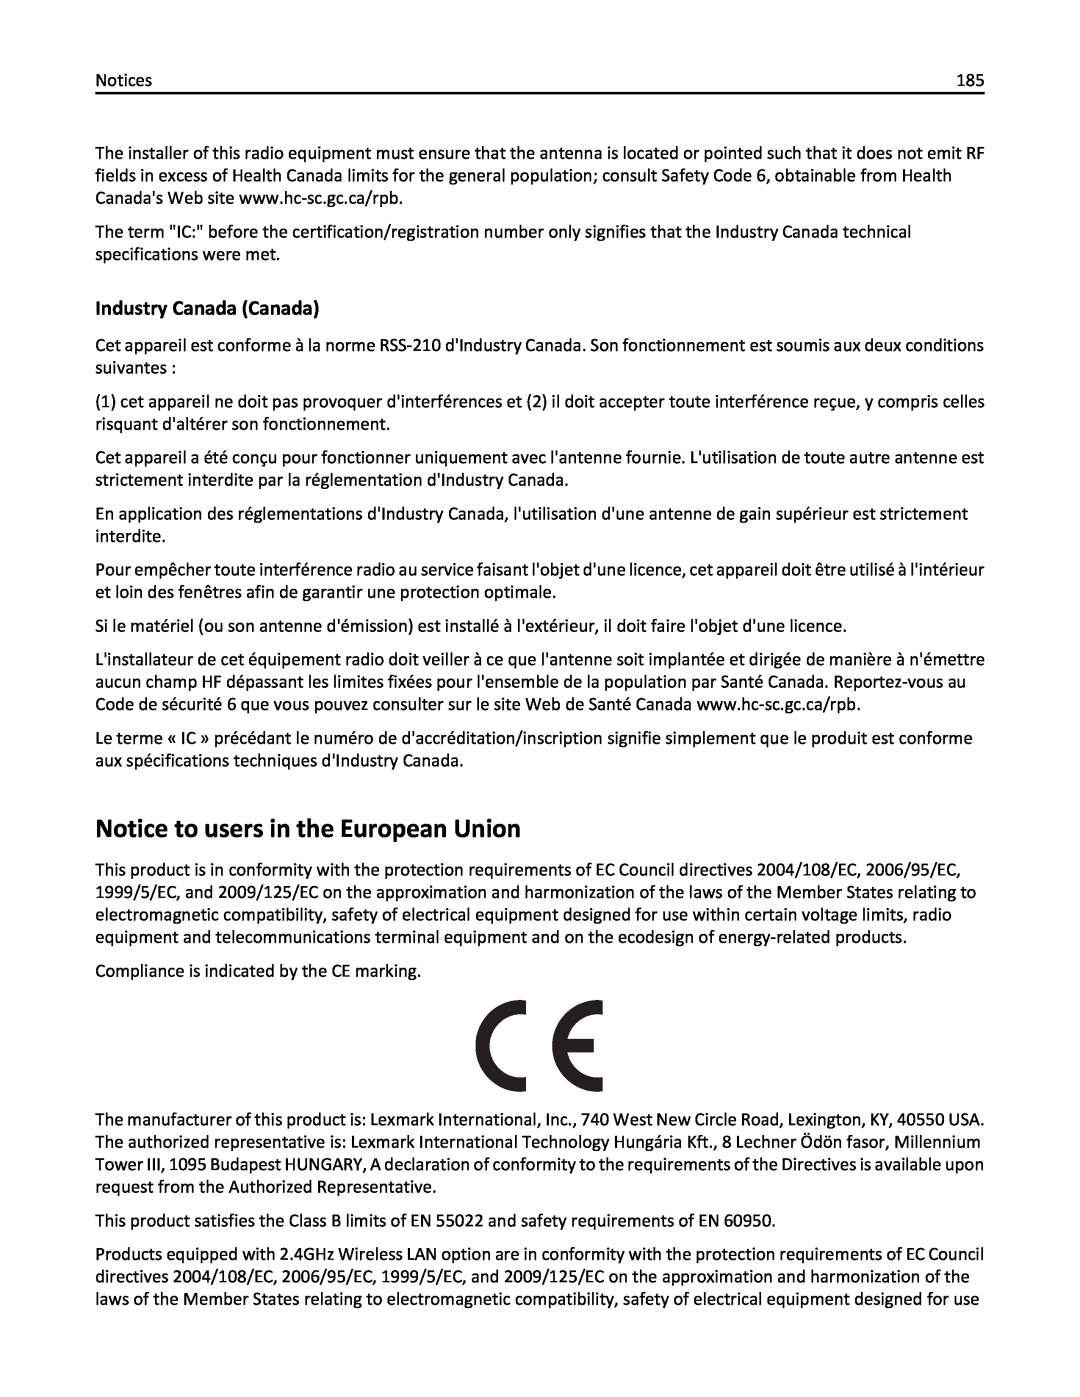 Lexmark 90P3000, PRO4000C manual Notice to users in the European Union, Industry Canada Canada 